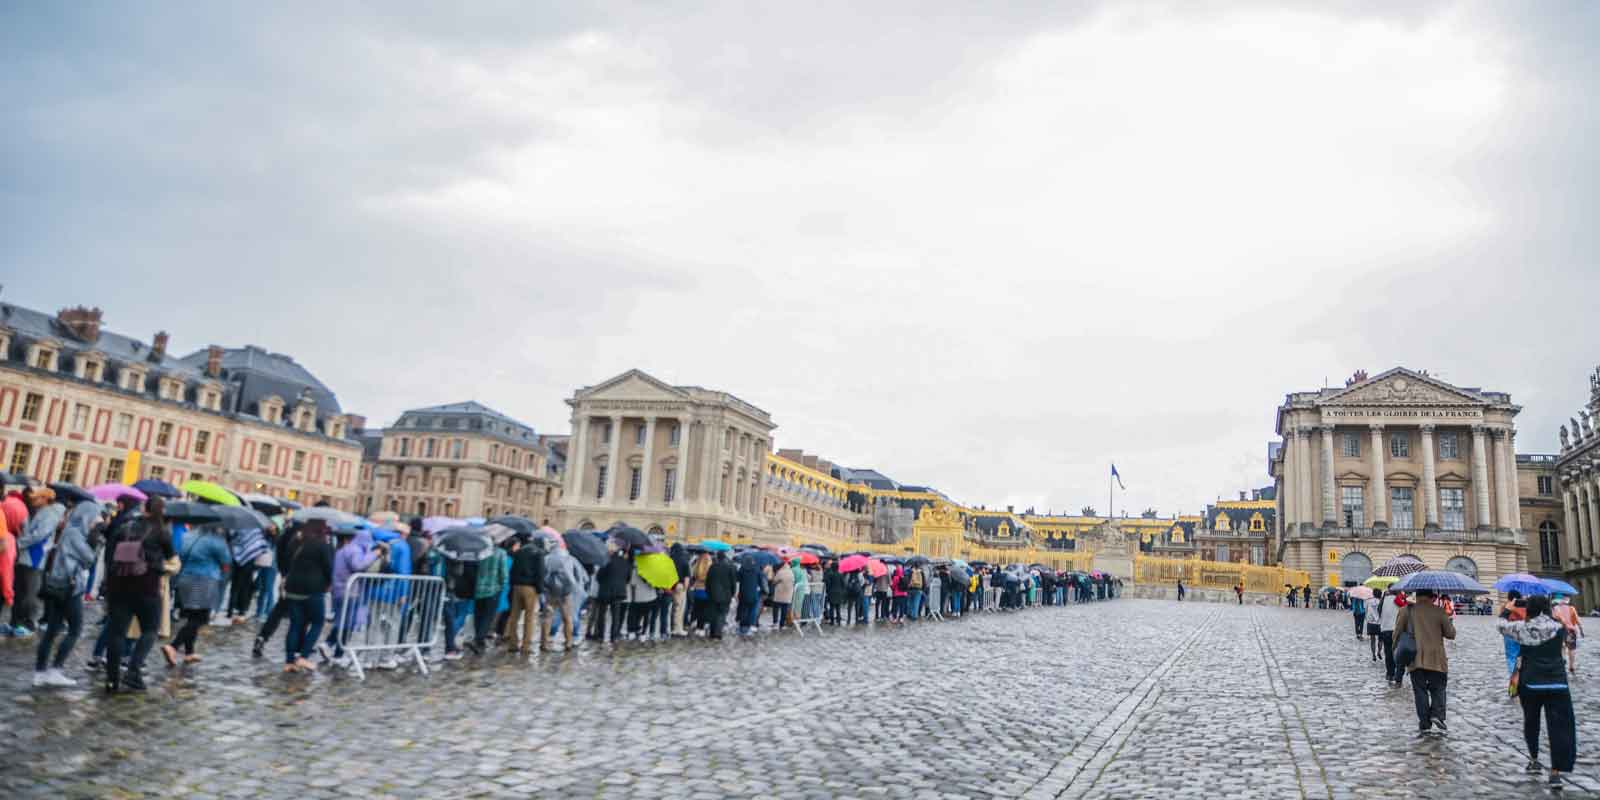 Photograph of a large crowd of people lining up outside the Palace of Versailles in France.